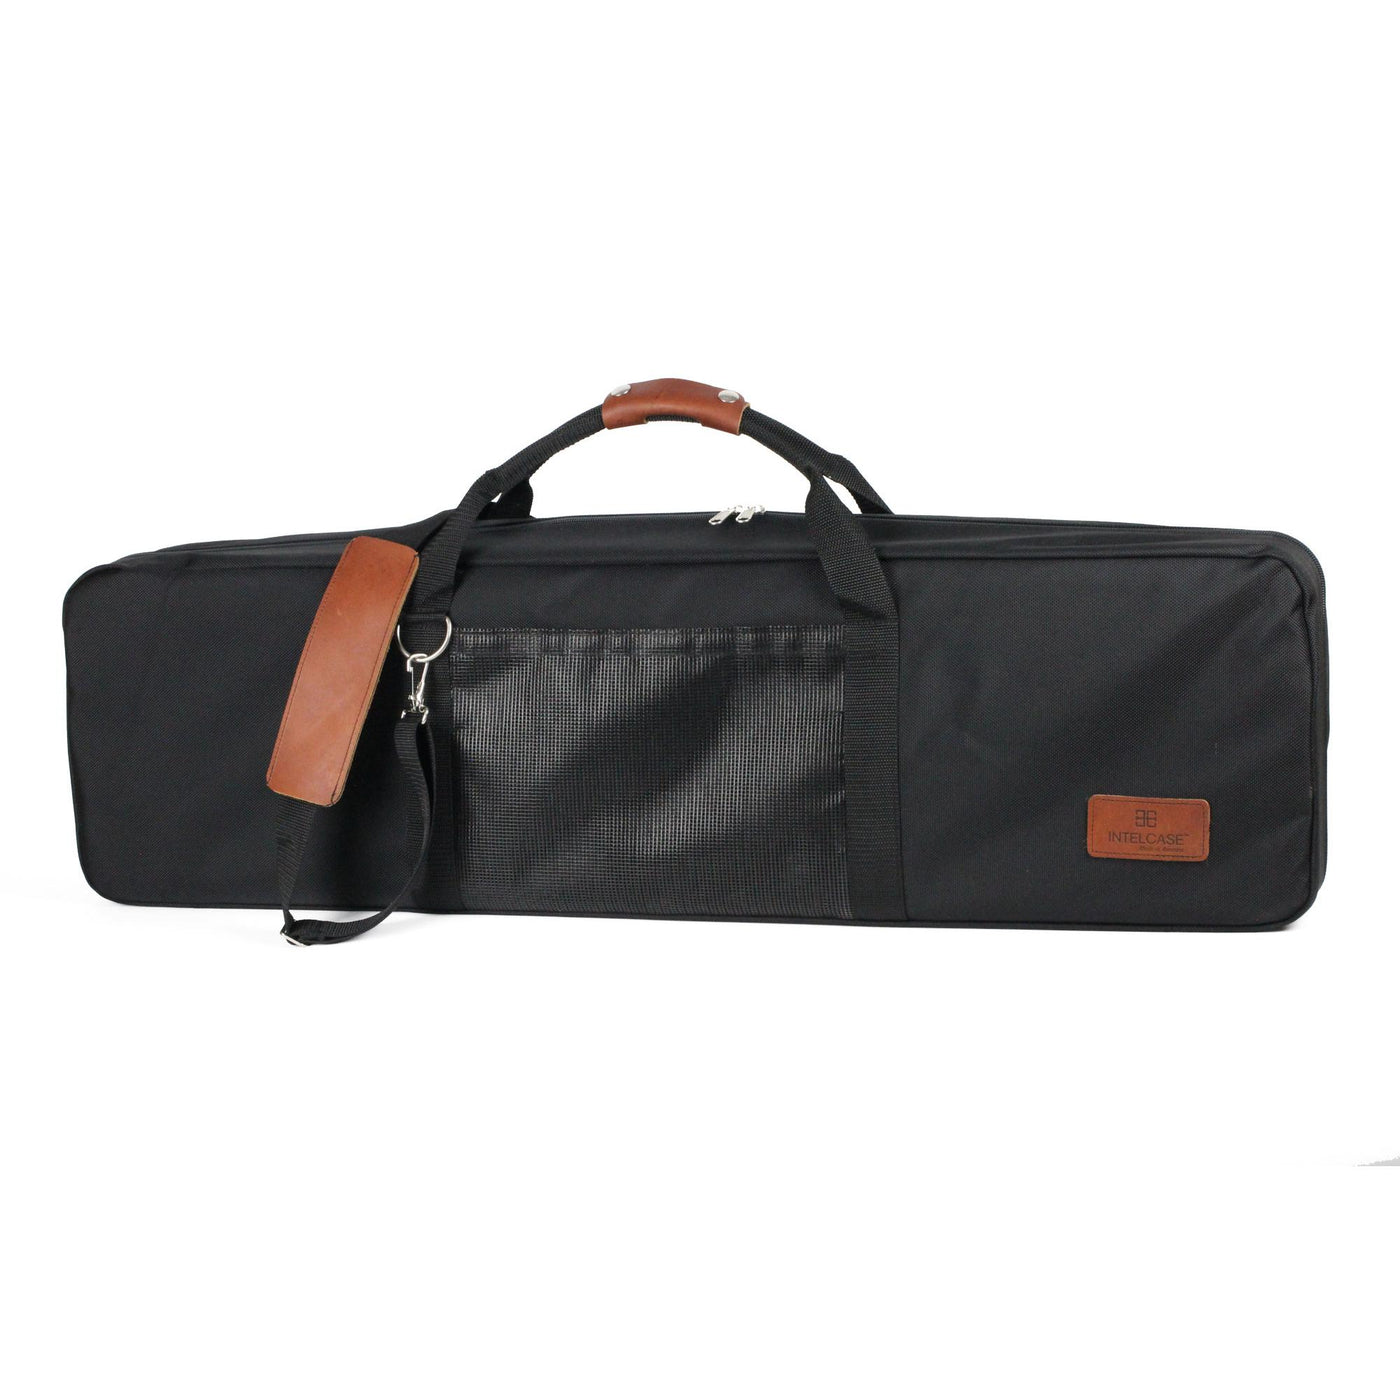 Negrini Gun Case Fitted Cover-Hunting/Outdoors-Kevin's Fine Outdoor Gear & Apparel